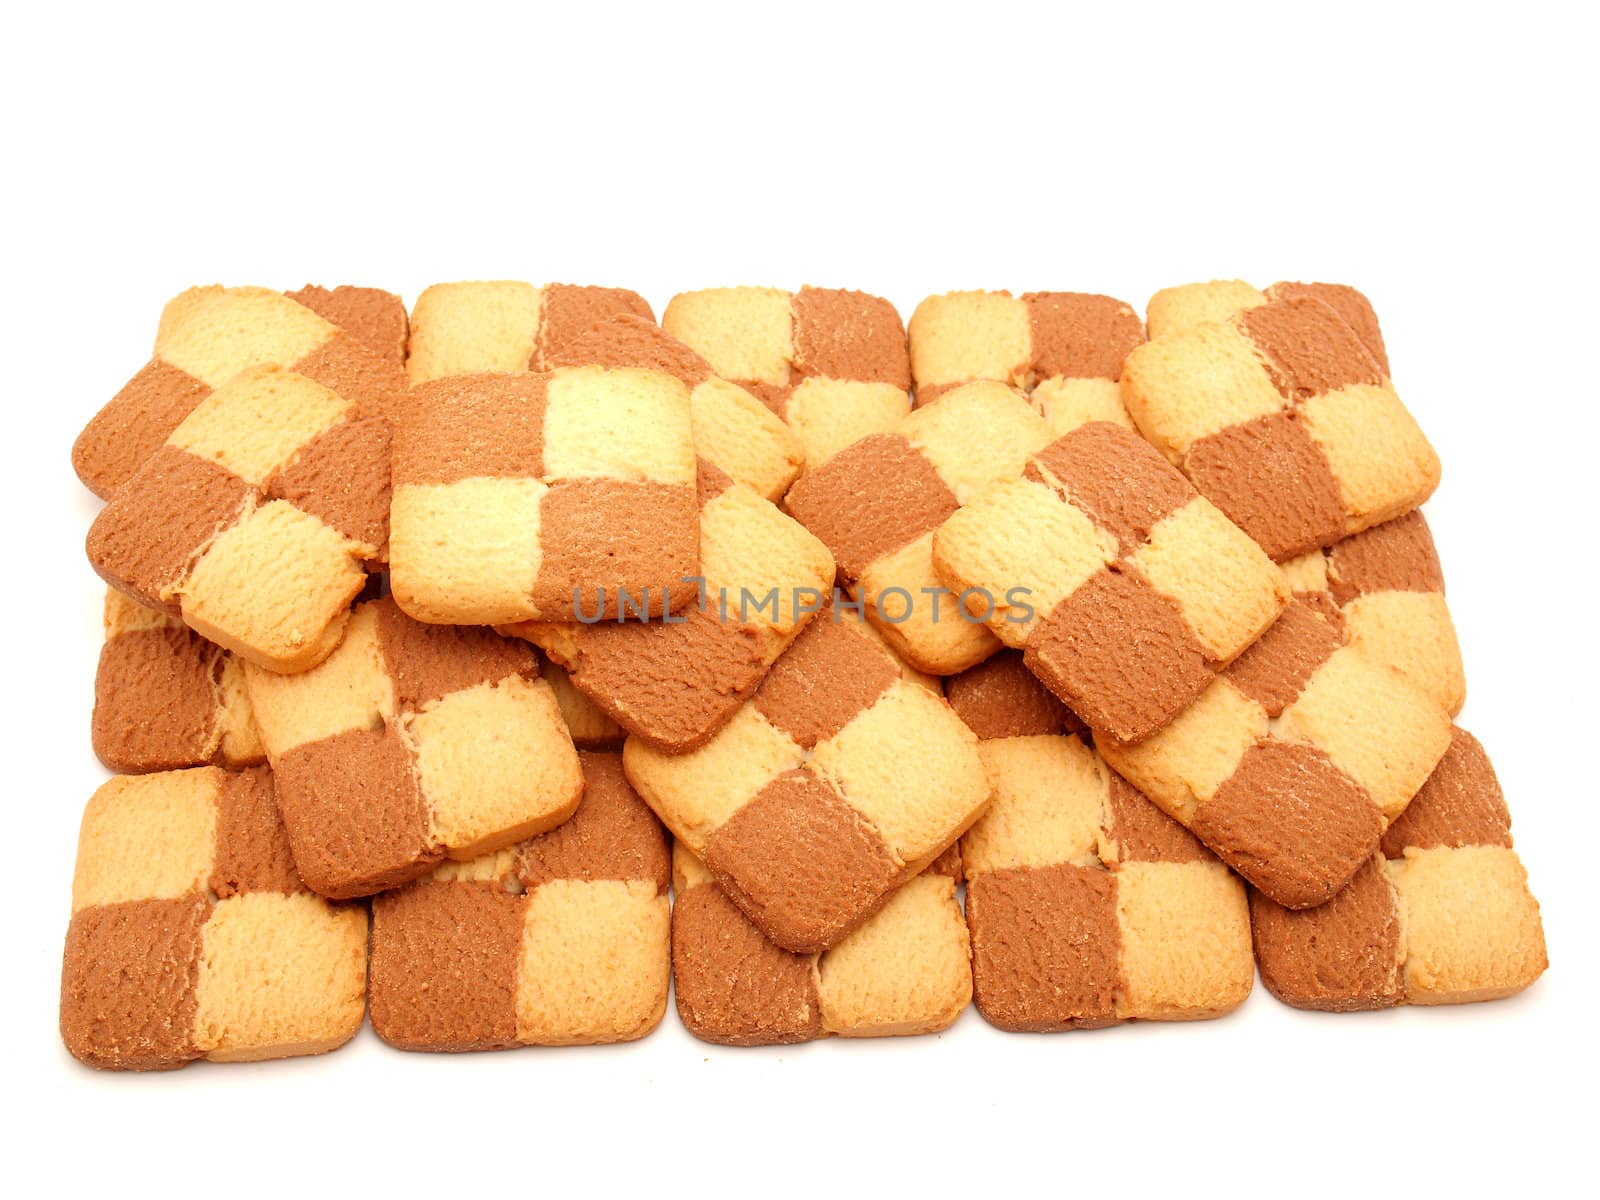 Cookies on a white background        